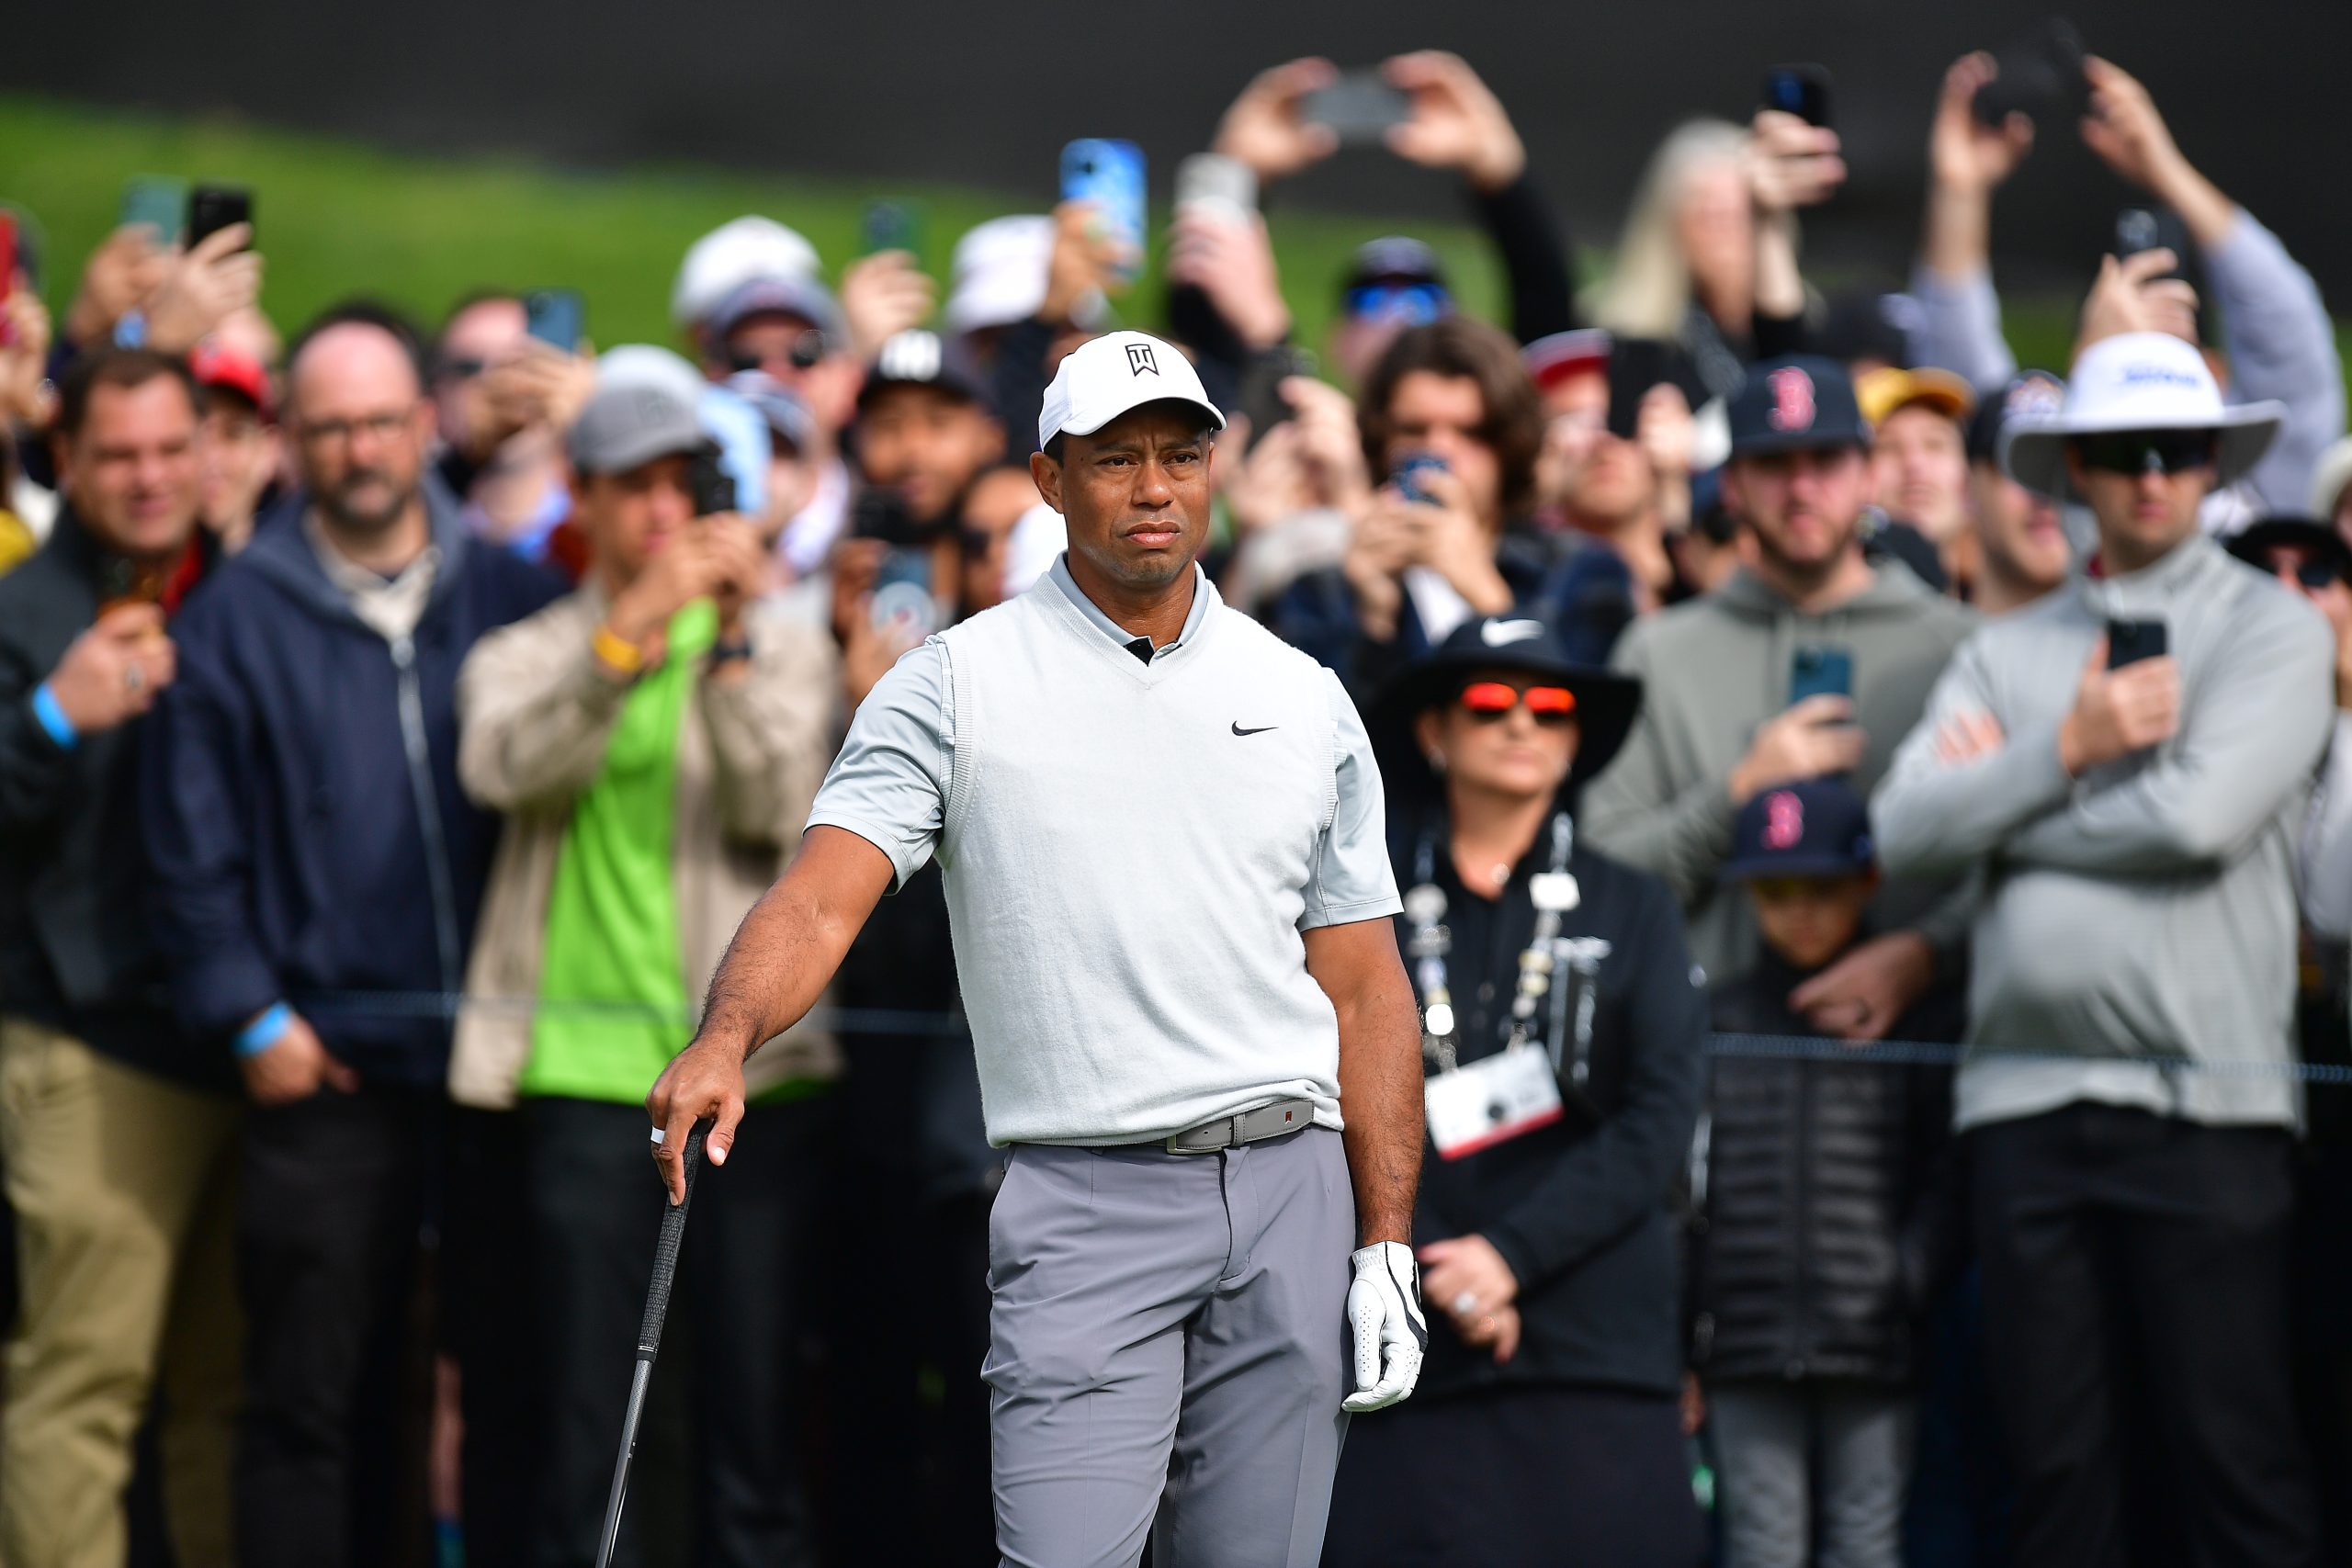 PGA Tour: Tiger Woods’ return among the six most intriguing storylines from this year’s West Coast Swing